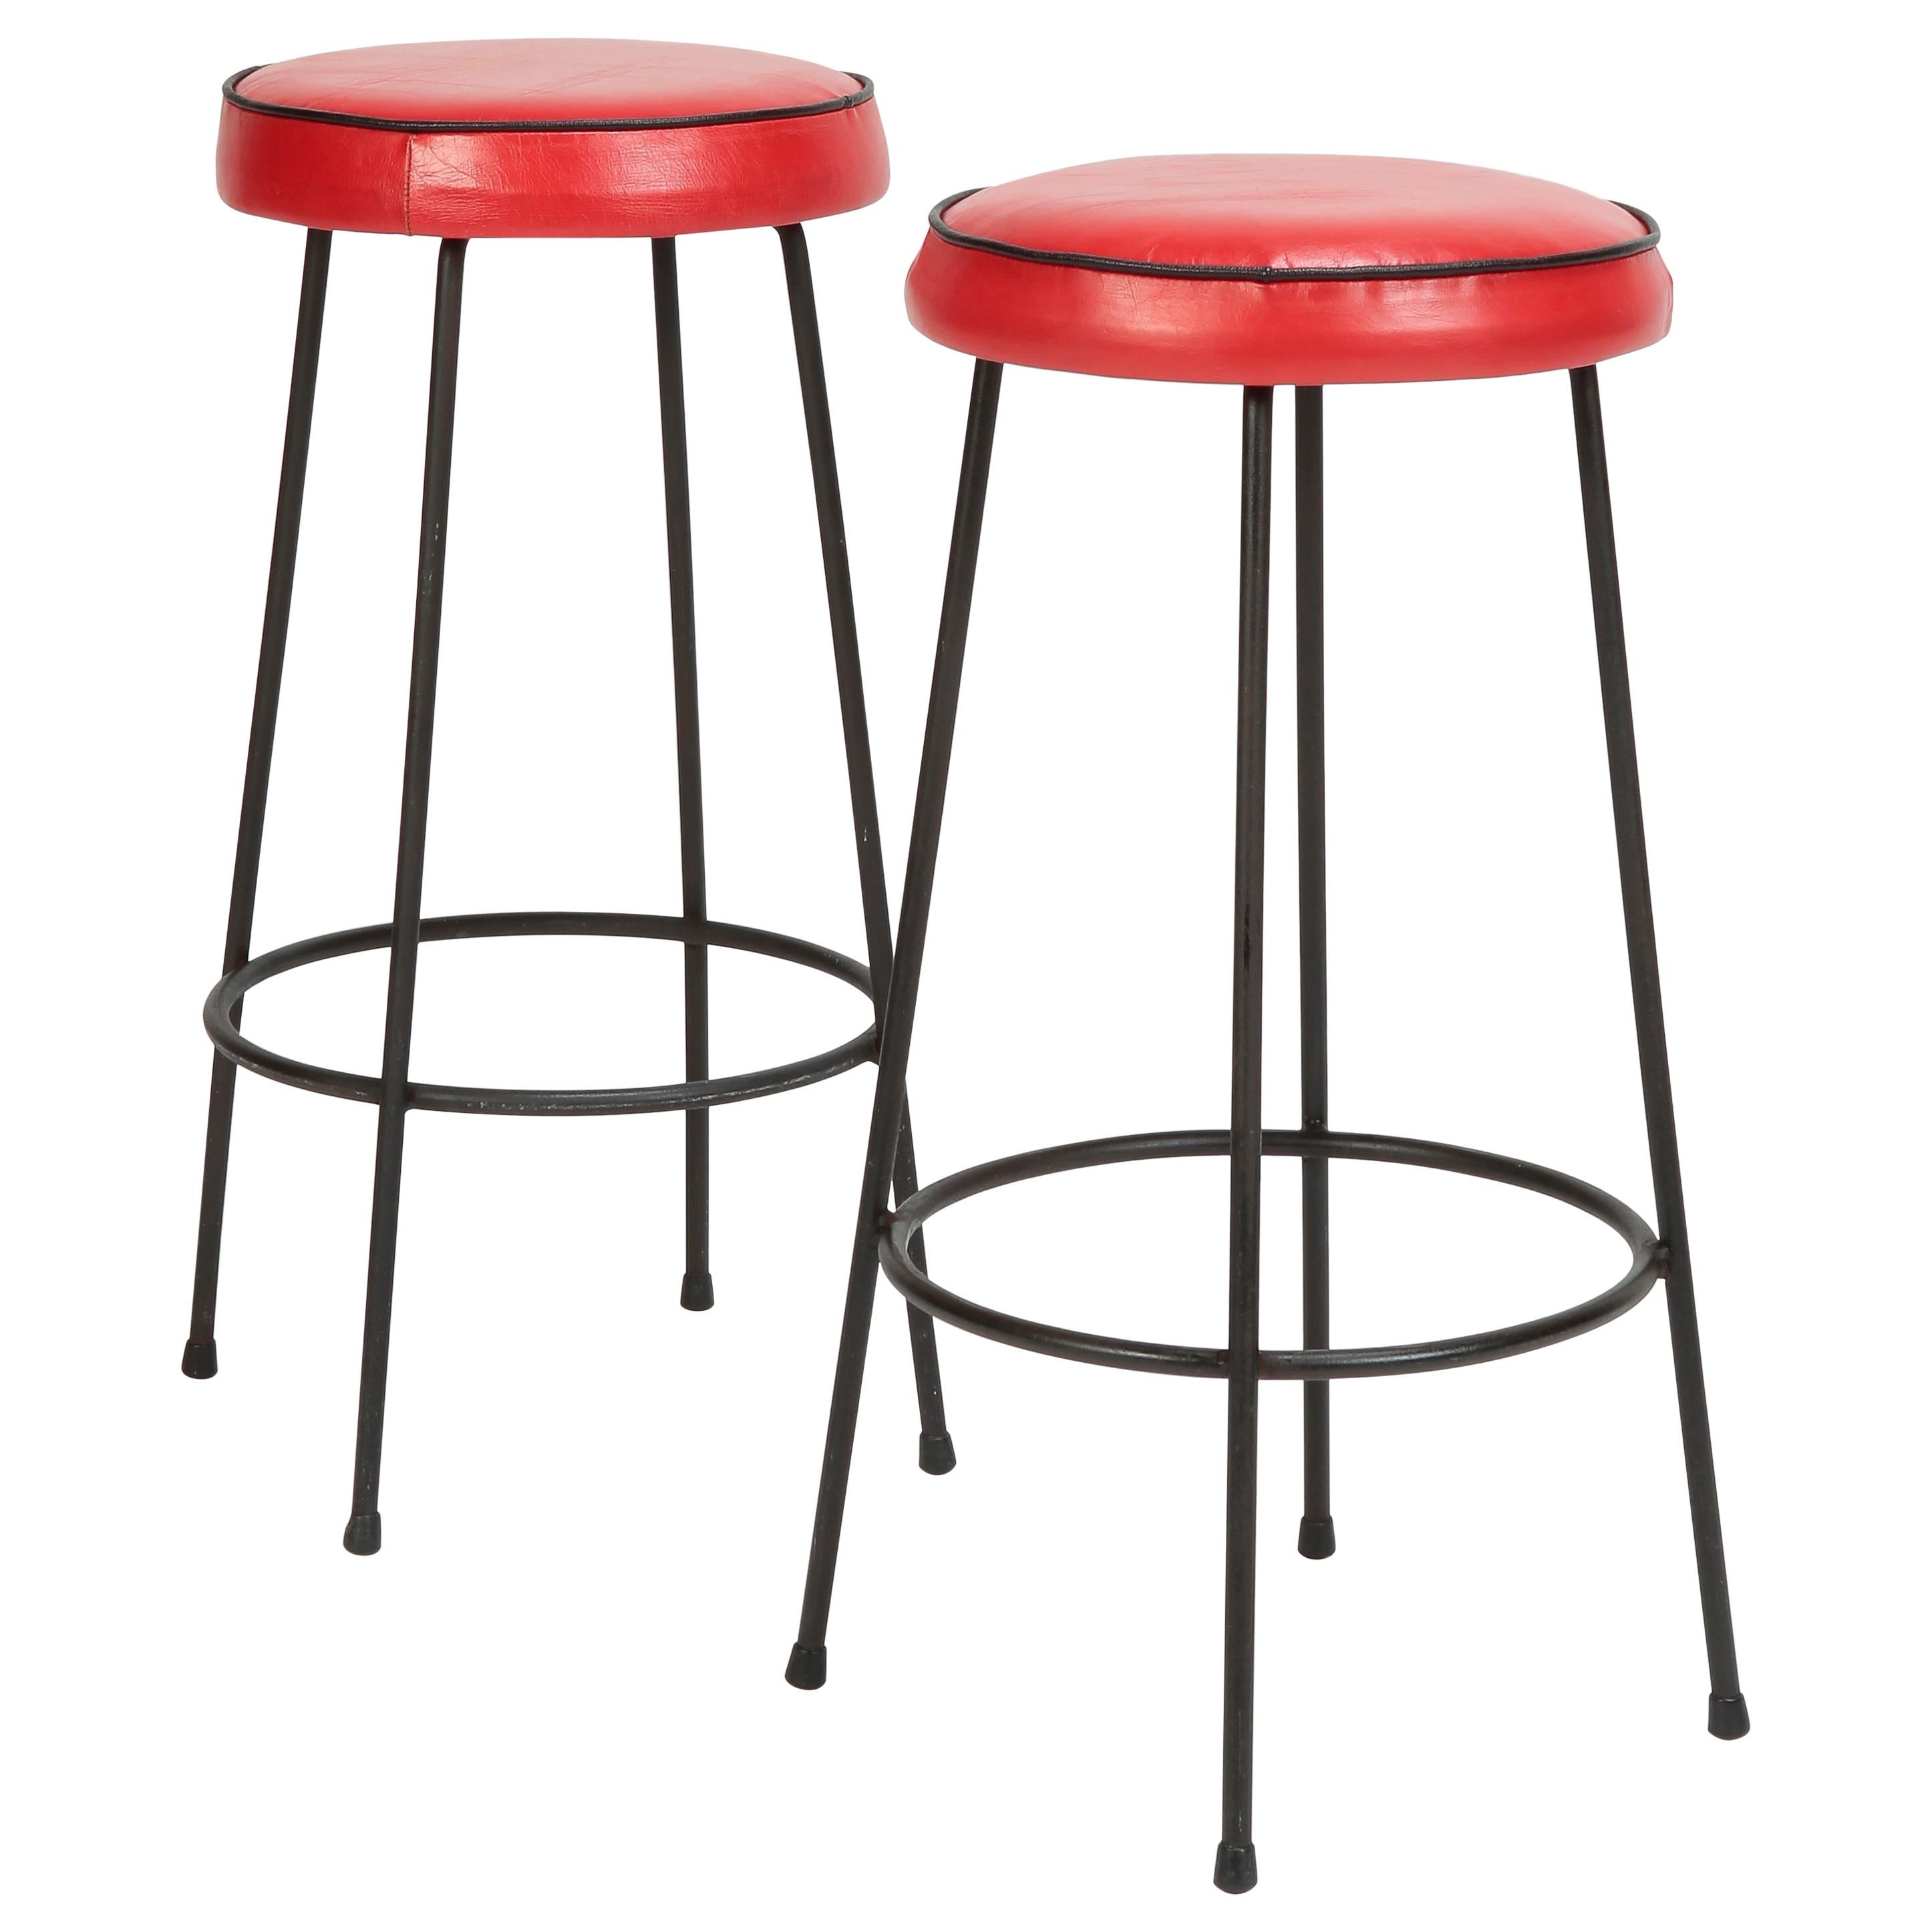 2 Bar Stools Red Leather Italy, 1950s